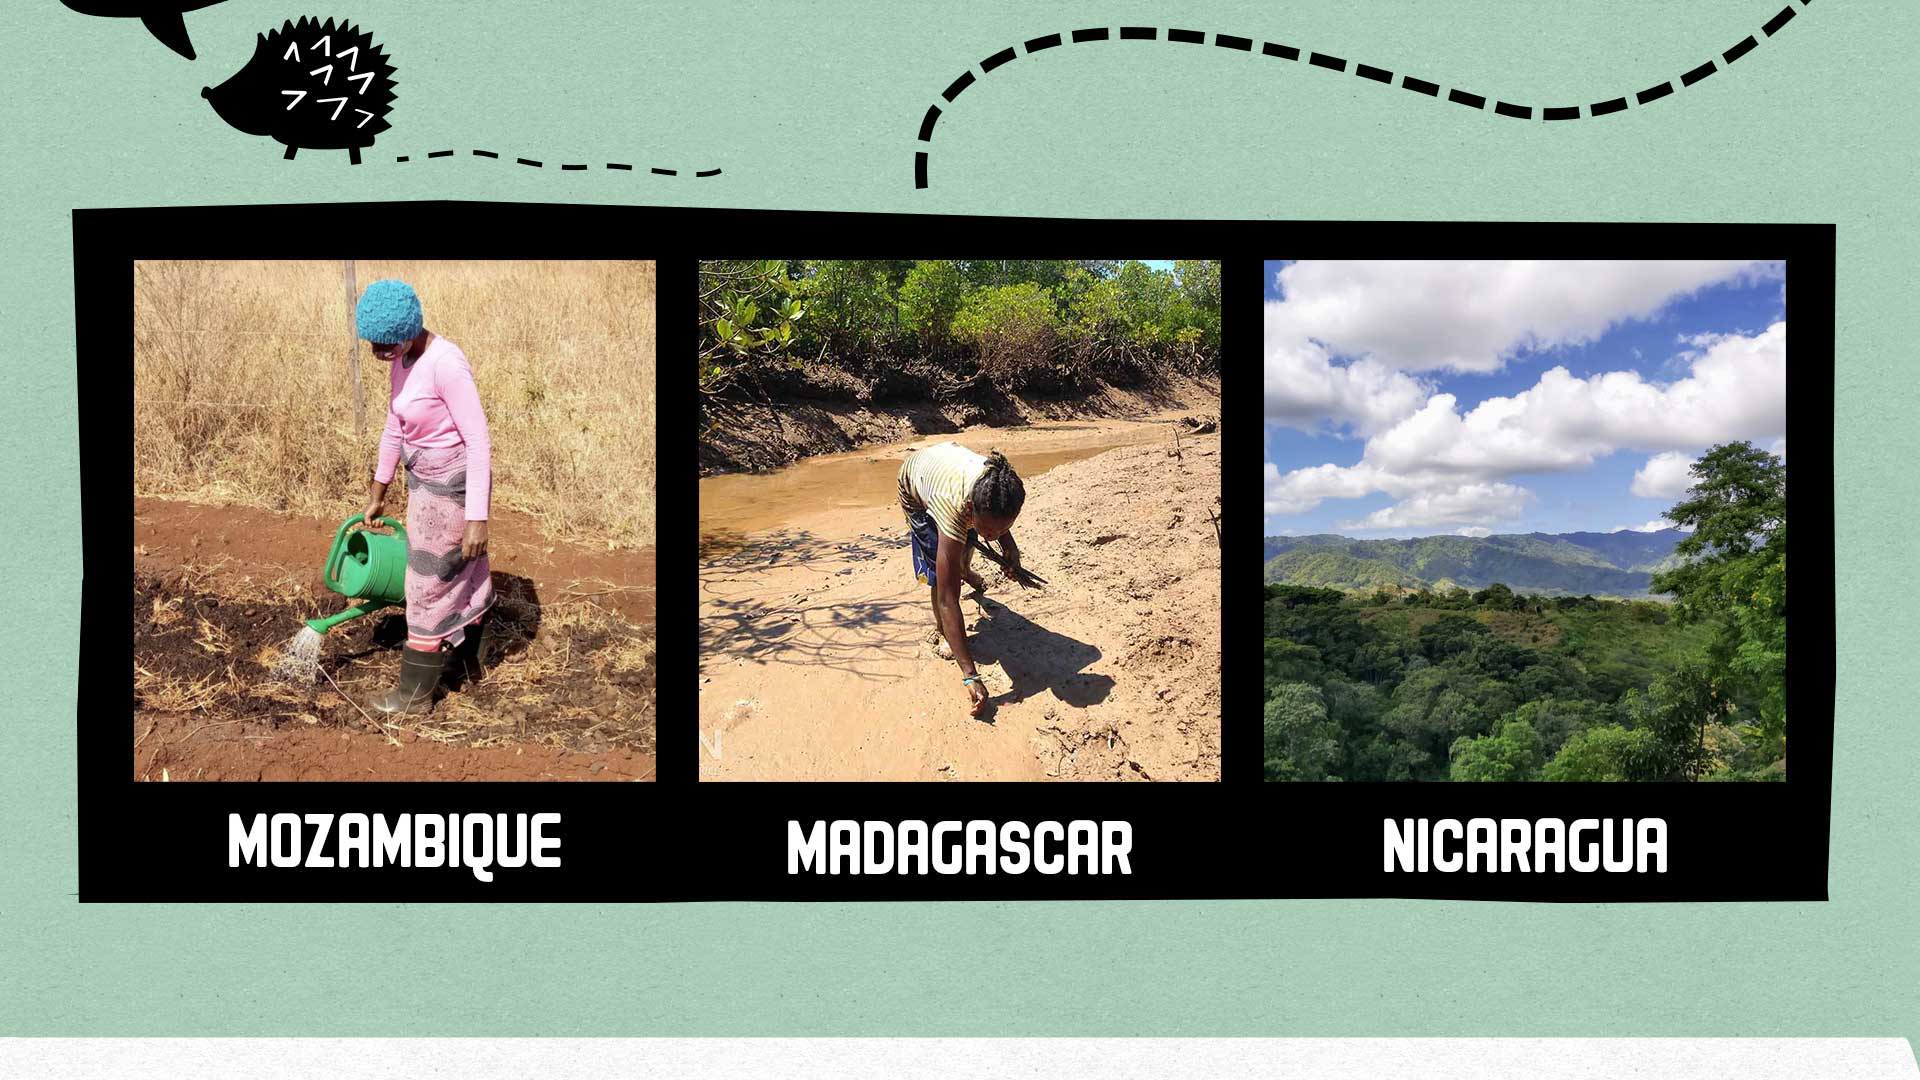 Women planting and watering tree seedlings in Mozambique and Madagascar. A view of a healthy forest in Nicaragua.